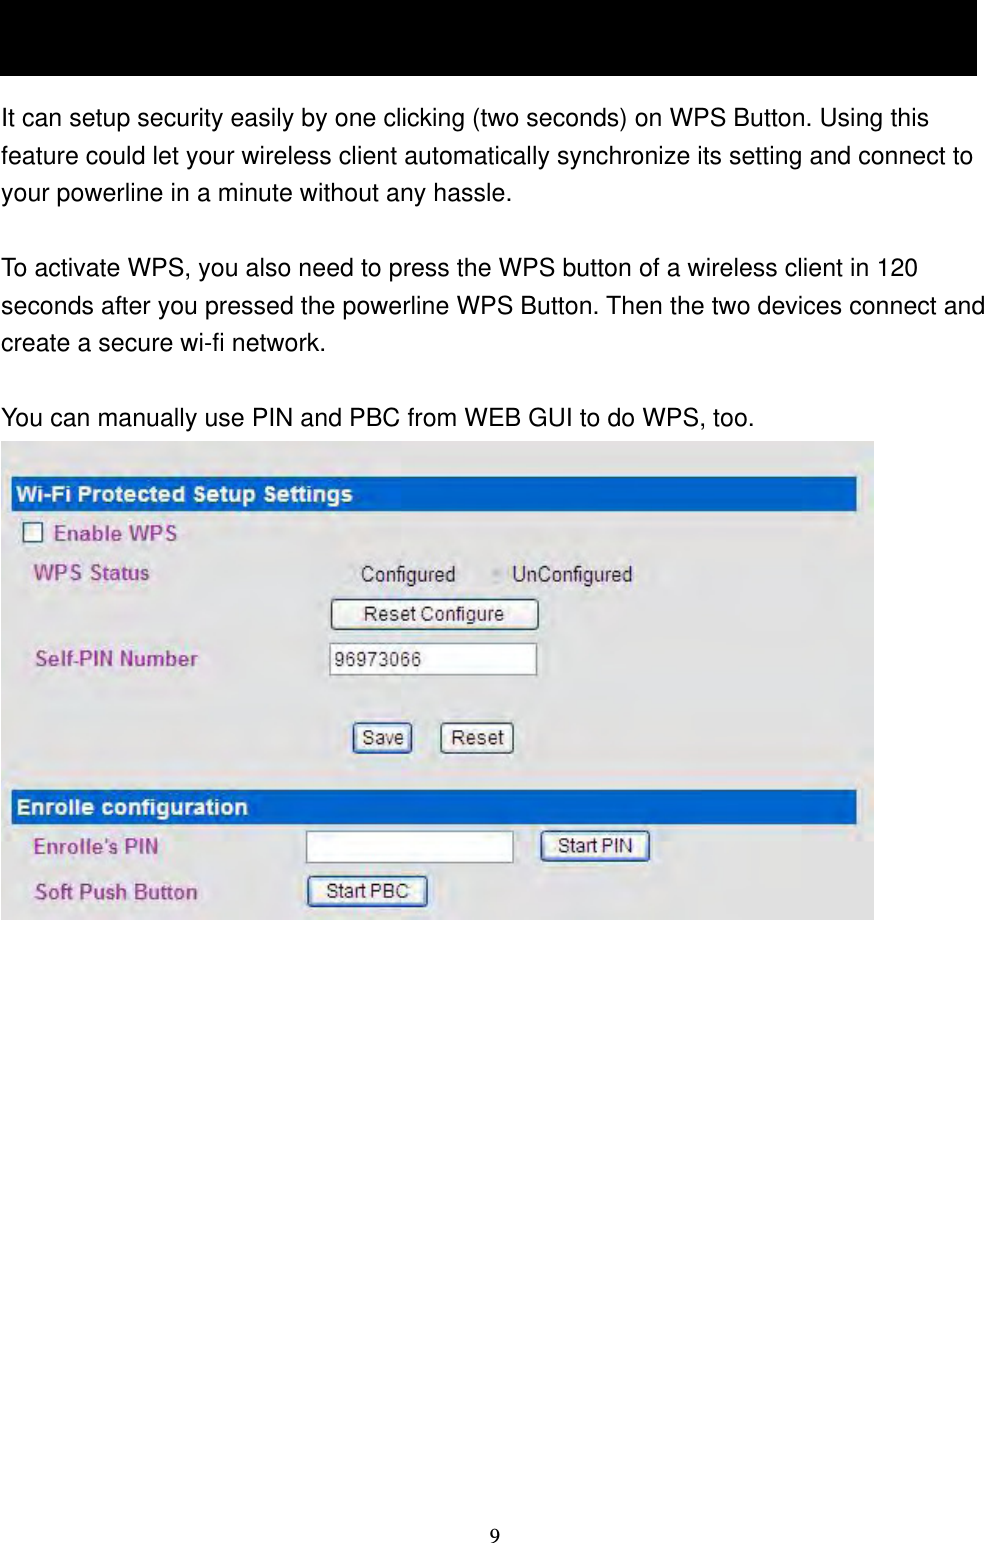  91.5 The WPS Button It can setup security easily by one clicking (two seconds) on WPS Button. Using this feature could let your wireless client automatically synchronize its setting and connect to your powerline in a minute without any hassle.    To activate WPS, you also need to press the WPS button of a wireless client in 120 seconds after you pressed the powerline WPS Button. Then the two devices connect and create a secure wi-fi network.    You can manually use PIN and PBC from WEB GUI to do WPS, too.  1.5 The WPS Button 